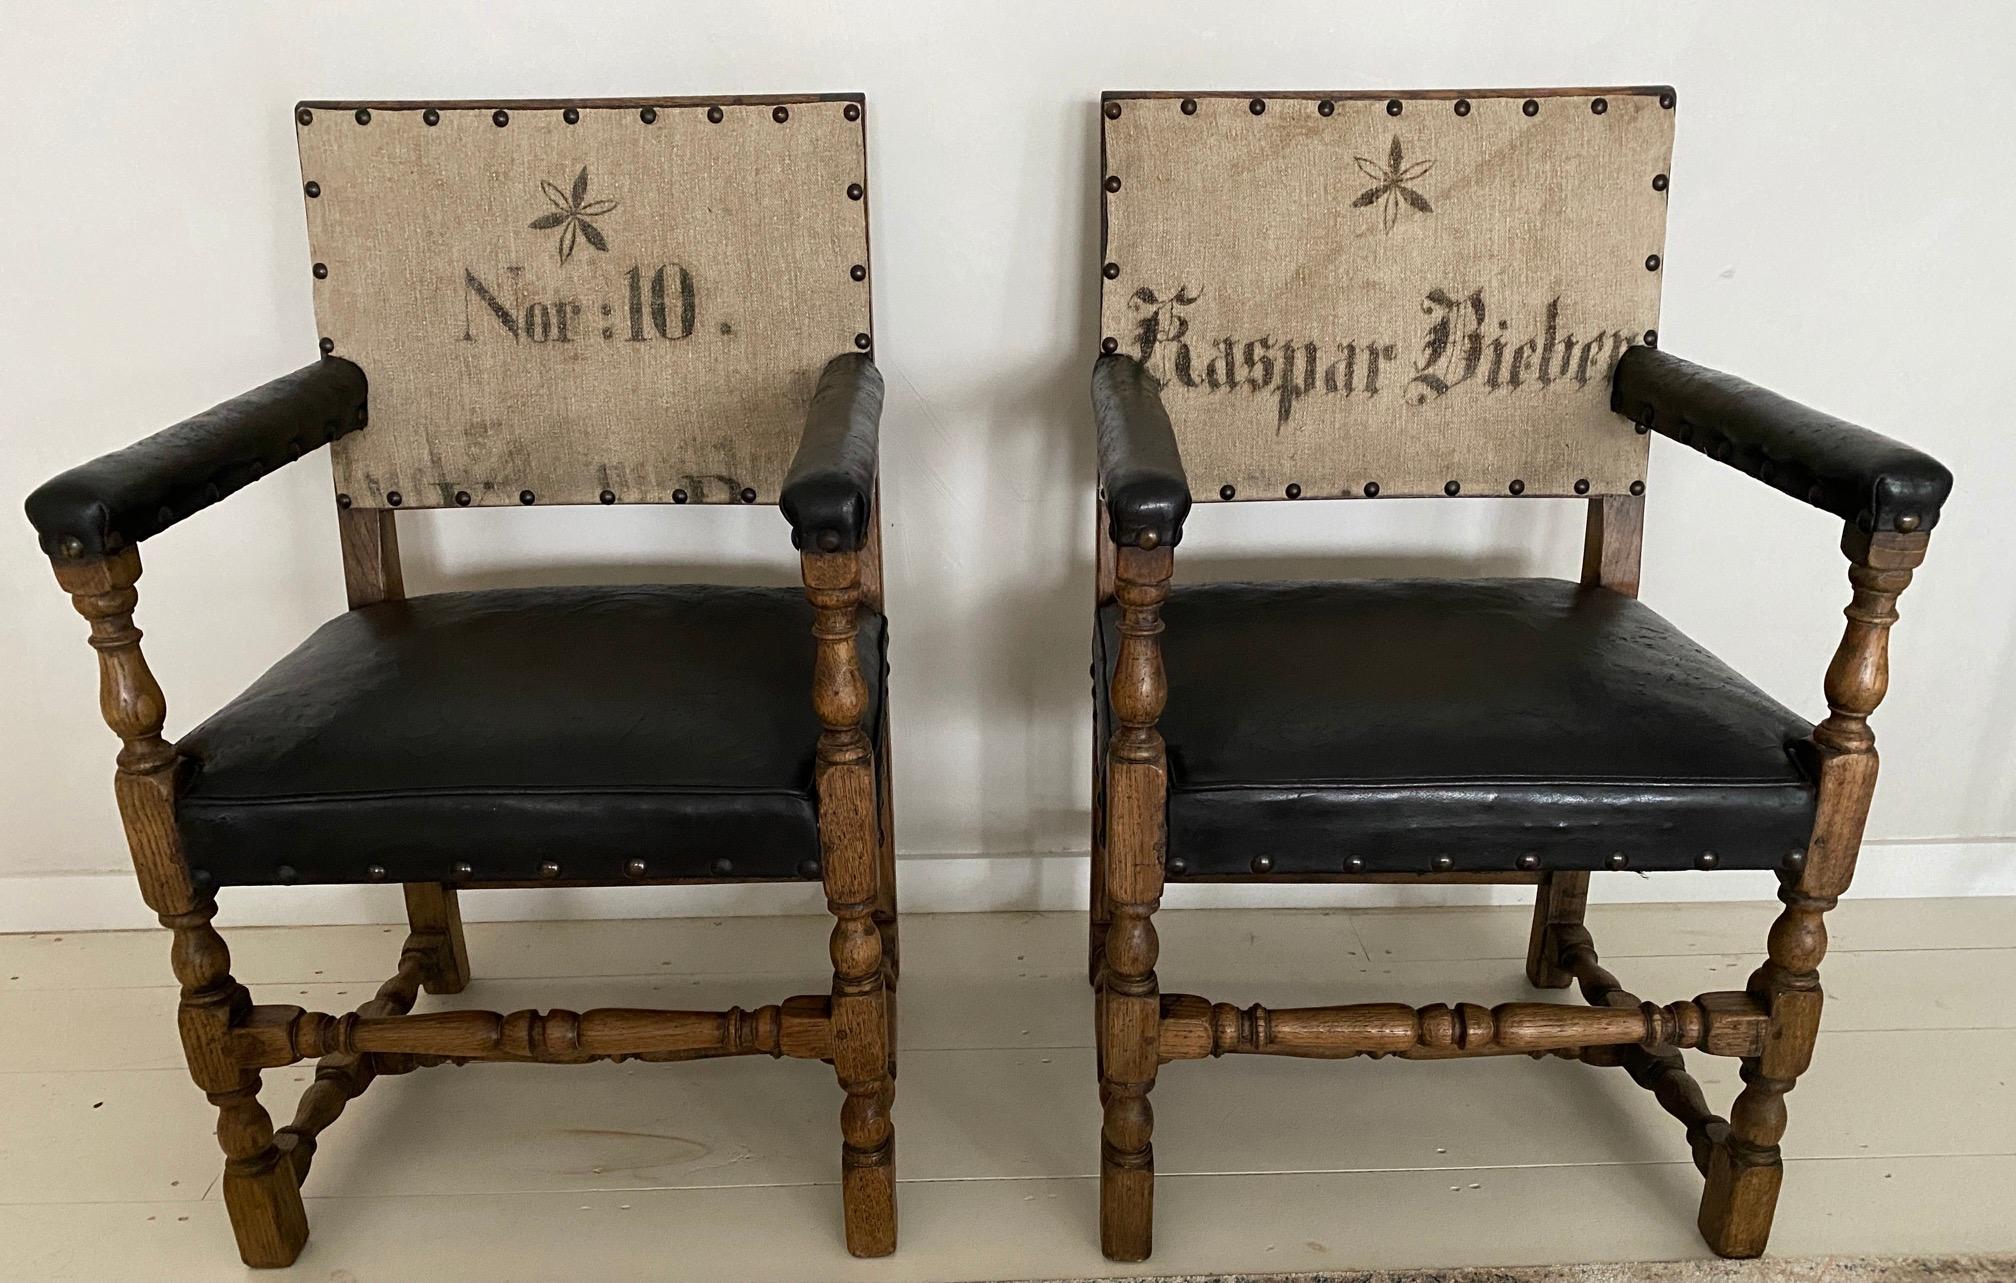 Pair of stately well proportioned square-backed upholstered renaissance style throne chairs with leather upholstered arm rests and seats accented with nail heads on turned uprights legs joined by a conforming front stretchers, constructed of stained